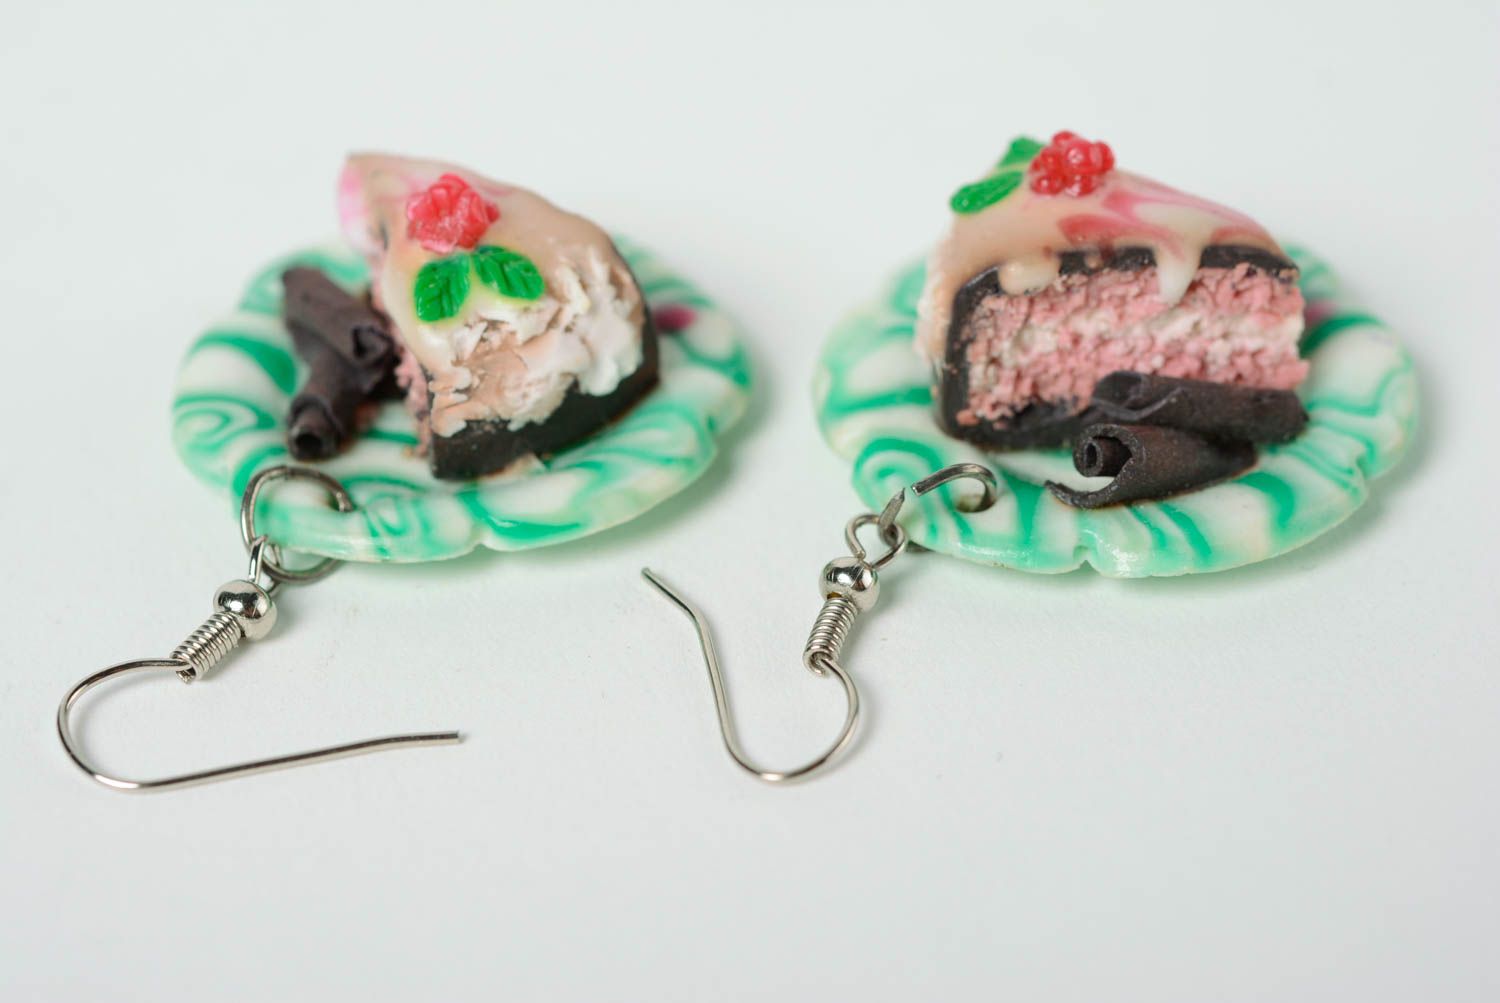 Women's designer handmade polymer clay earrings with fruit cake pieces photo 1